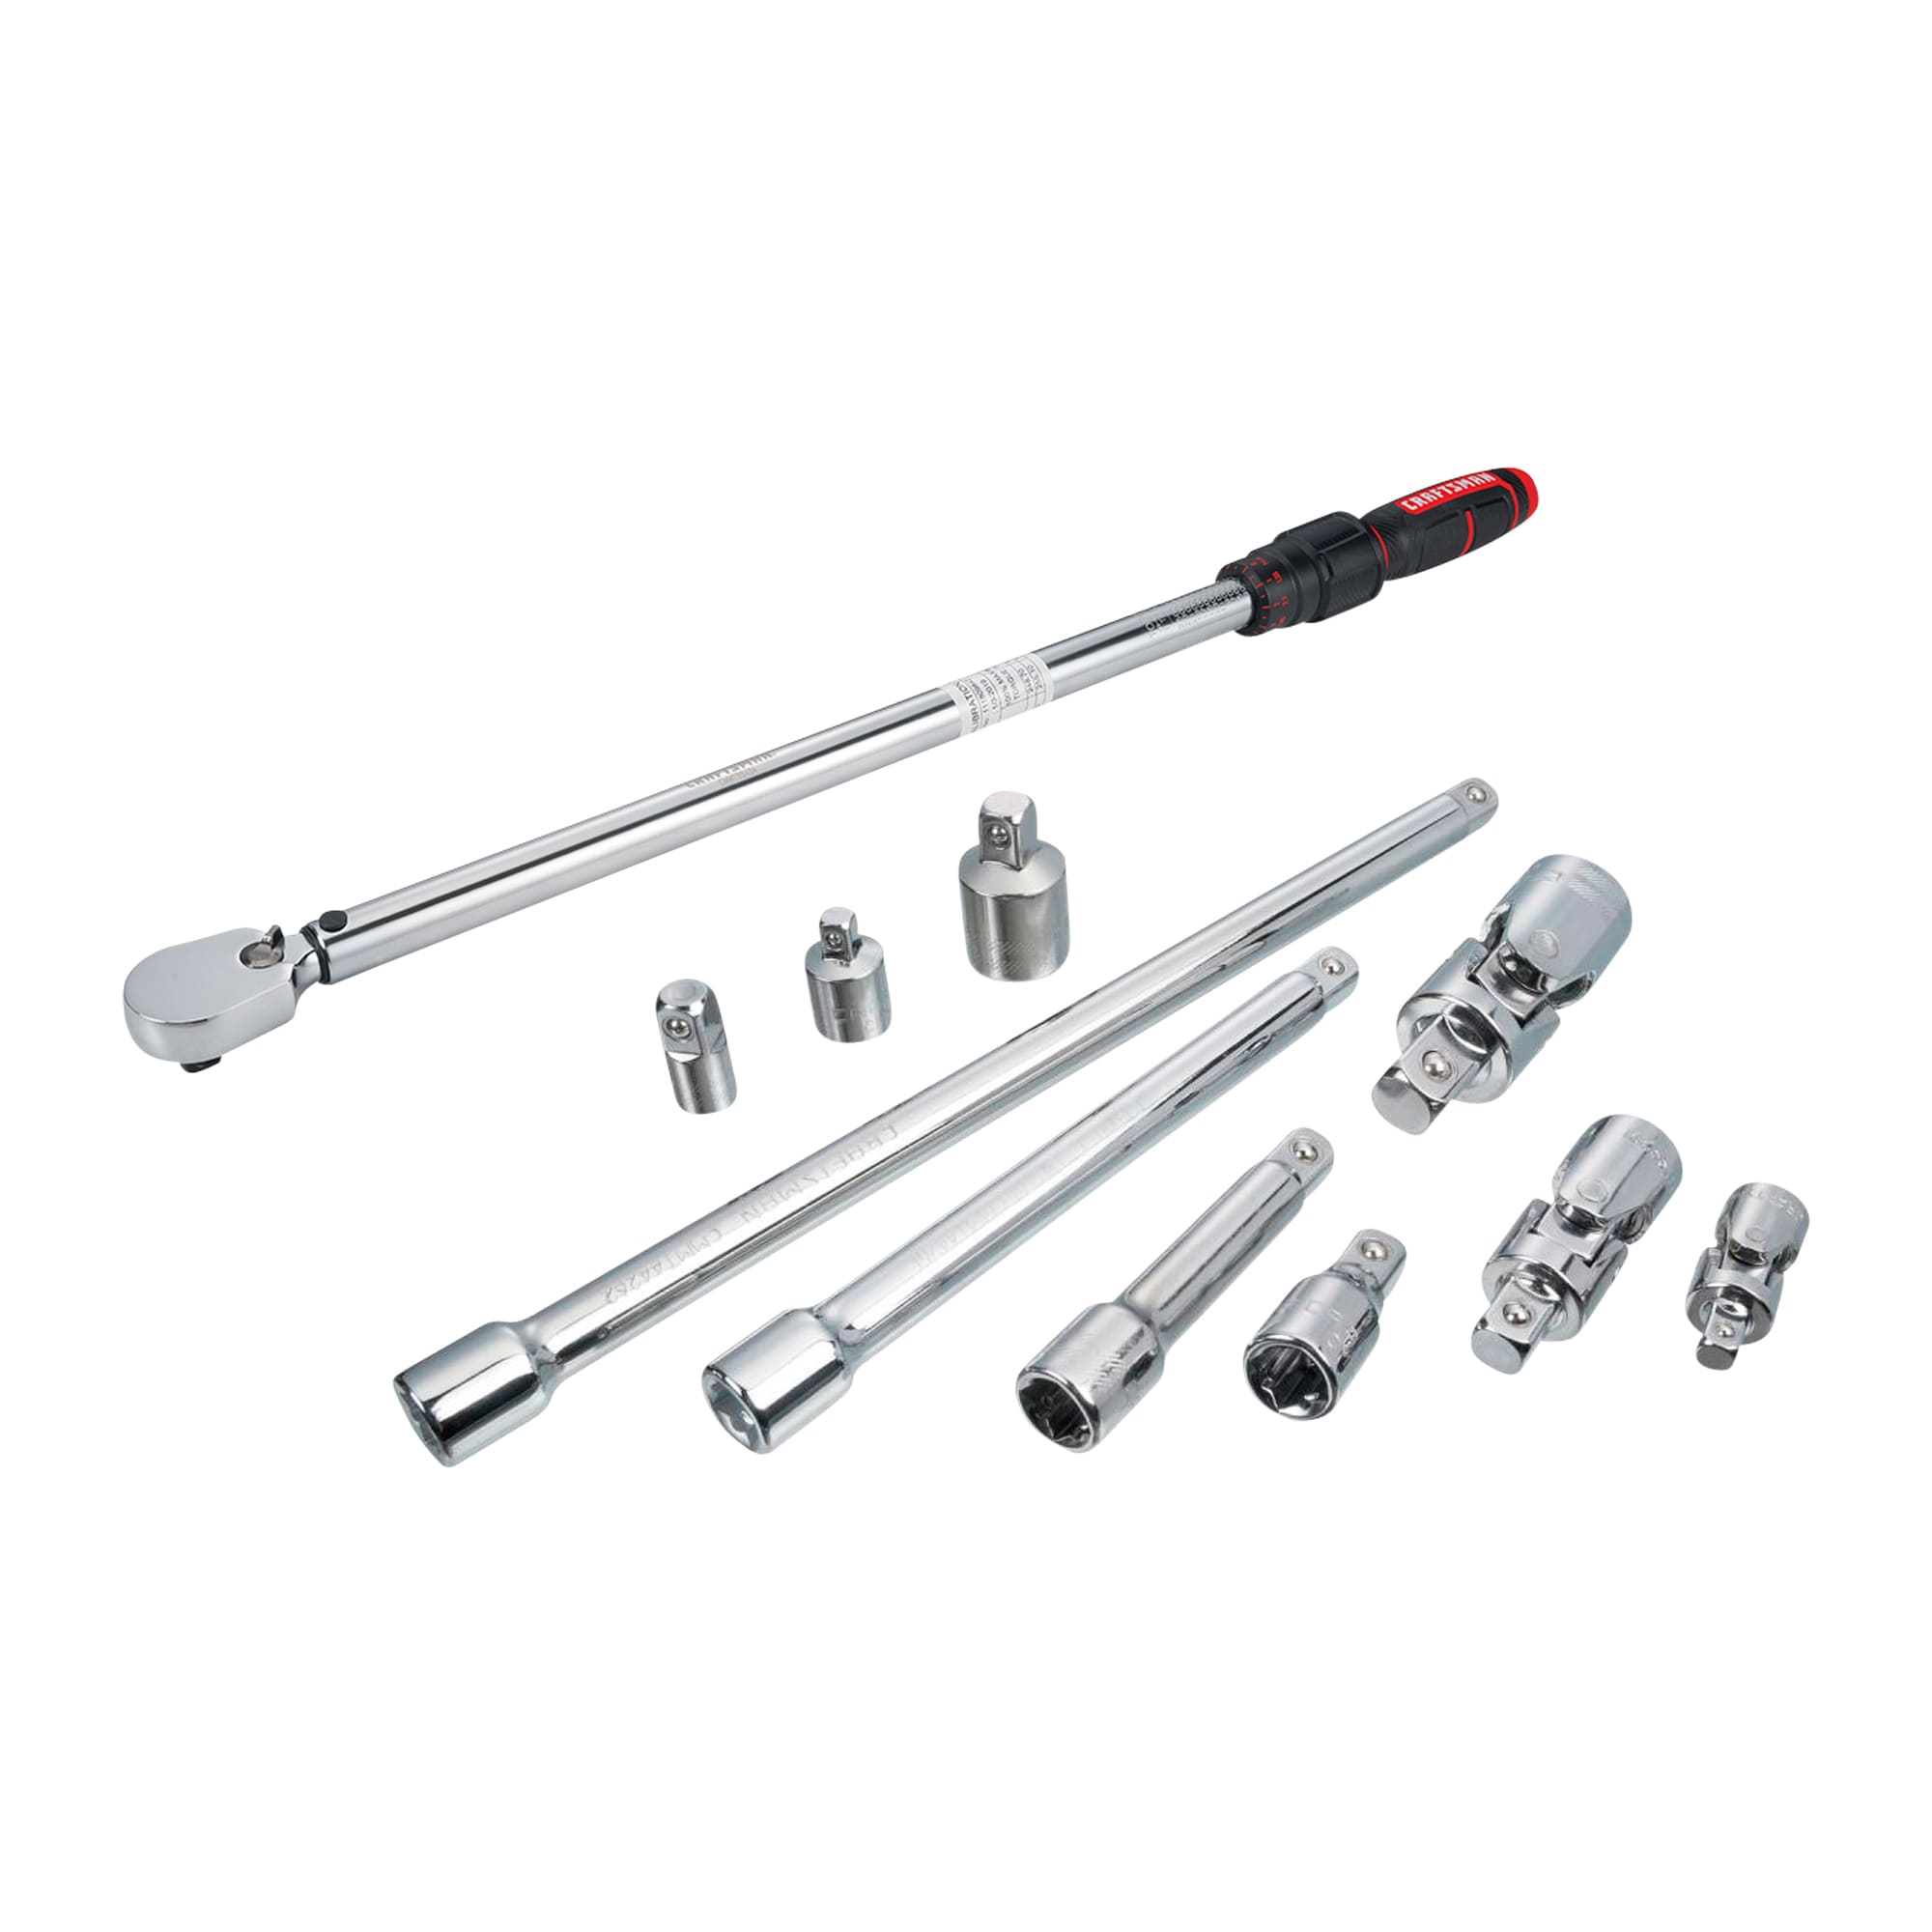 CRAFTSMAN 10-Piece Multi-drive Accessory Set & 1/2-in Drive Click Torque Wrench (50-ft lb to 250-ft lb)